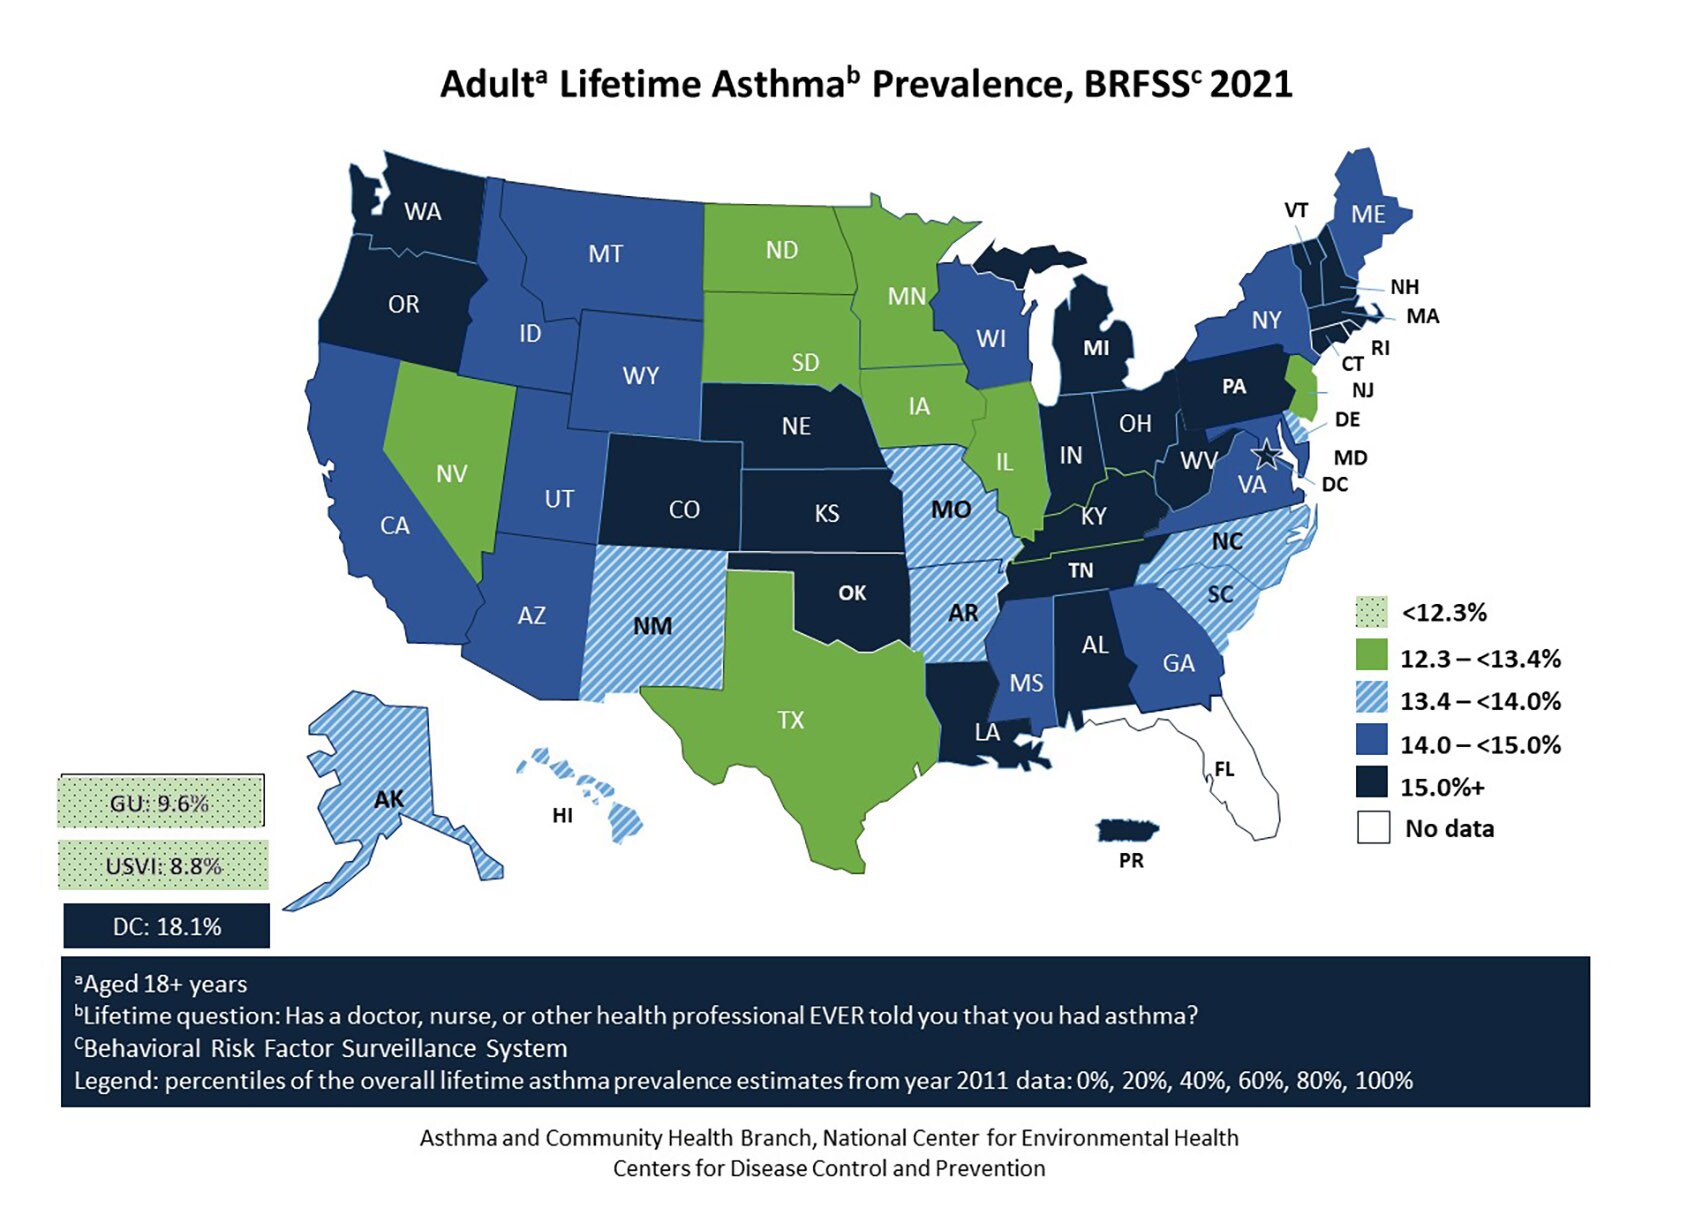 U.S. map showing adult self-reported lifetime asthma prevalence by state for BRFSS 2020